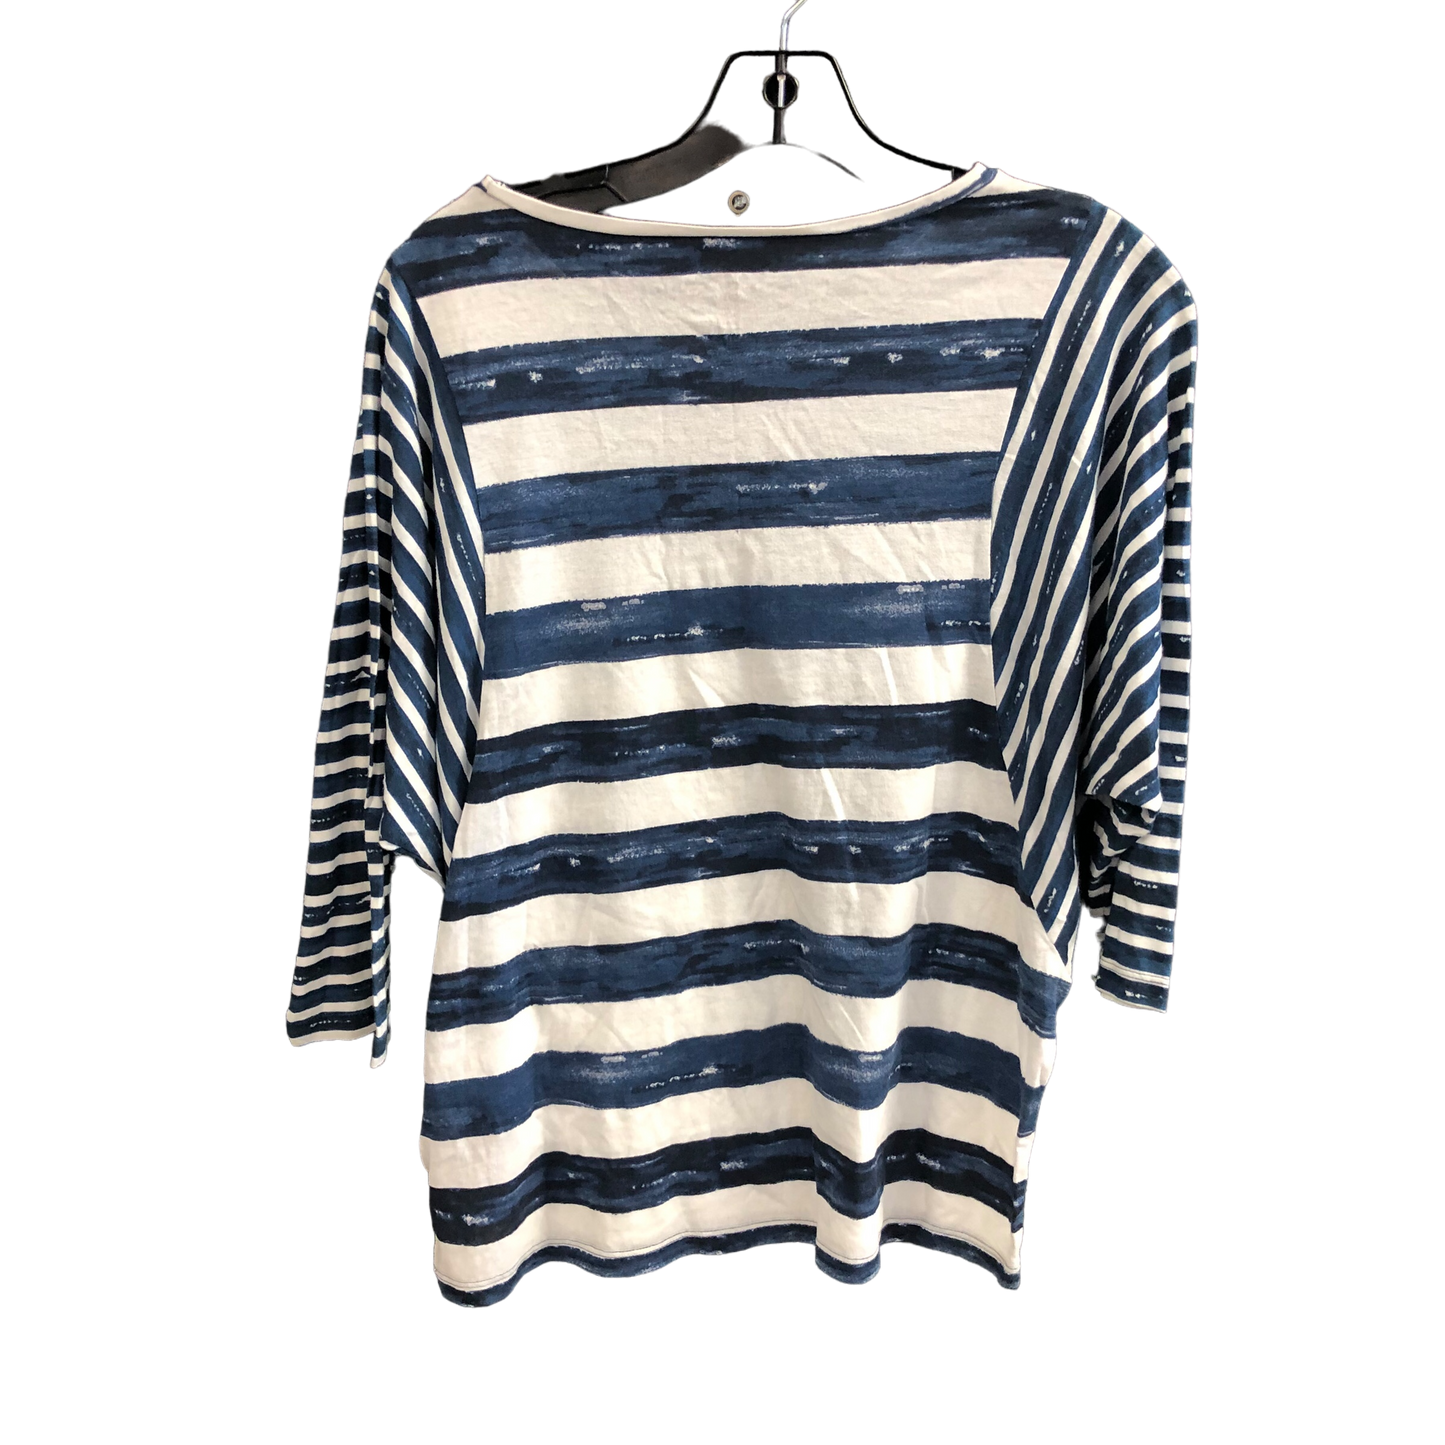 Blue & White Top Long Sleeve Tommy Hilfiger, Size S